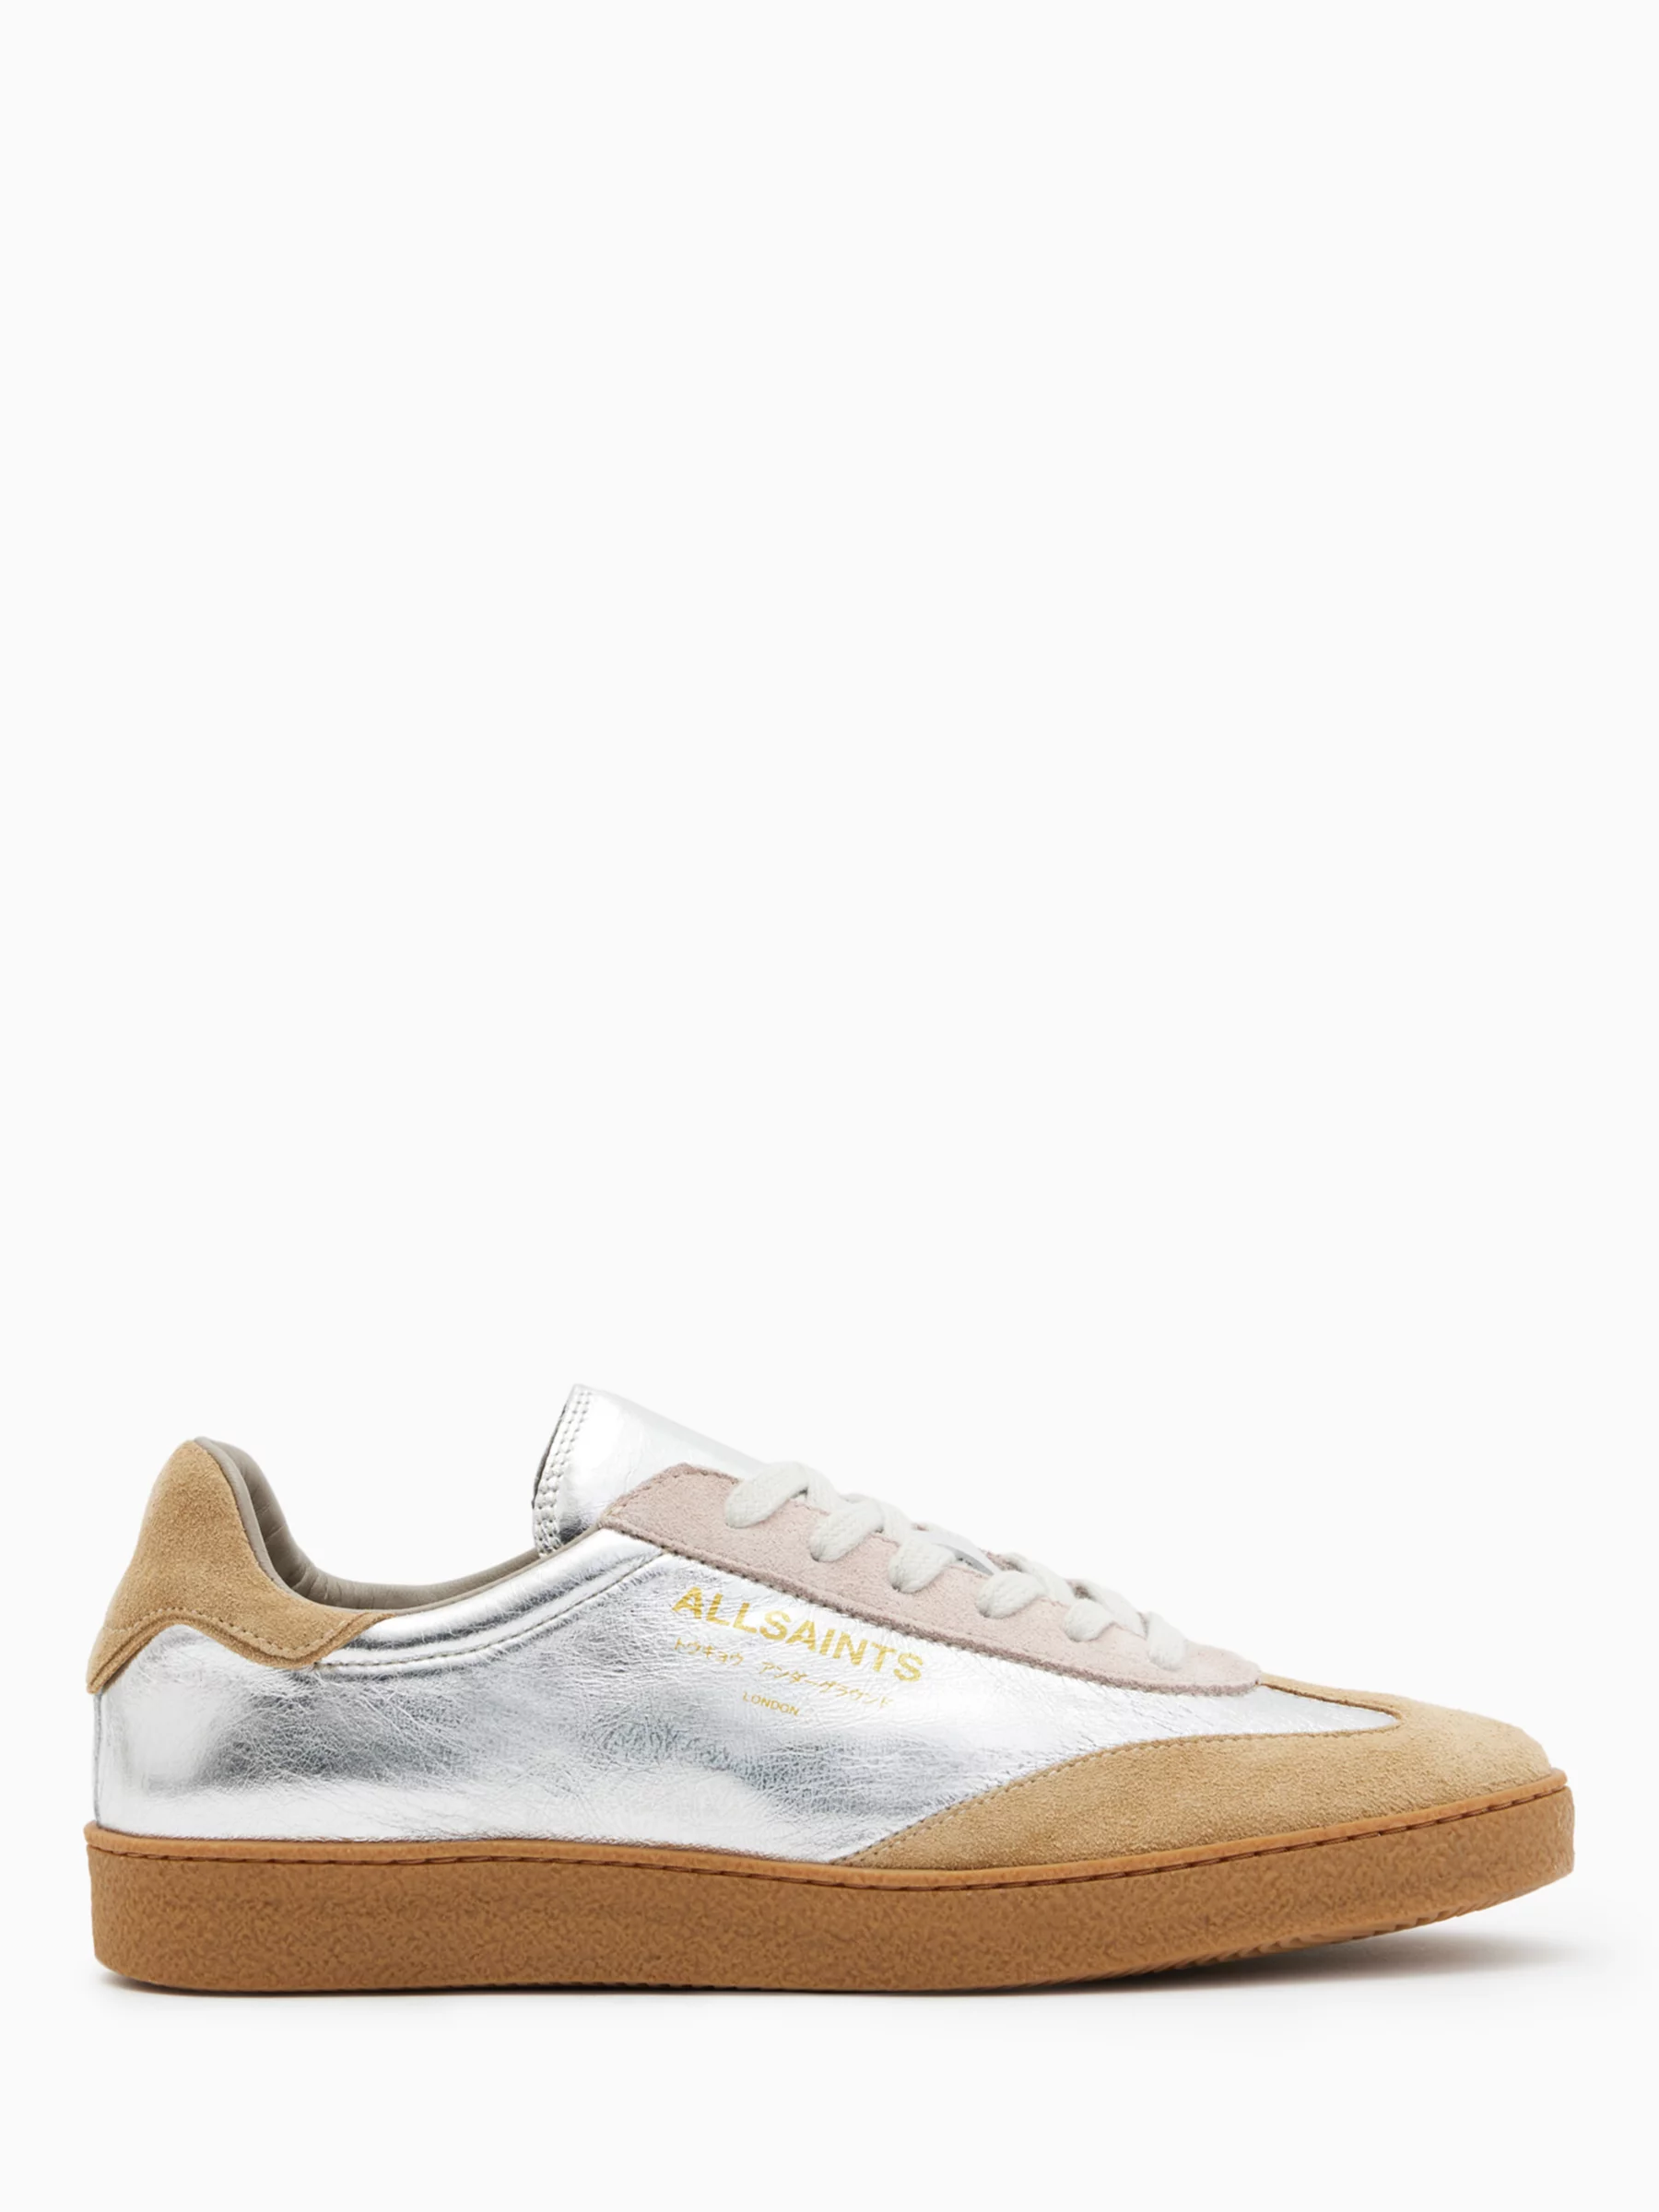 Allsaints Thelma Metallic Leather Trainers, Silver/rose Pink/tan